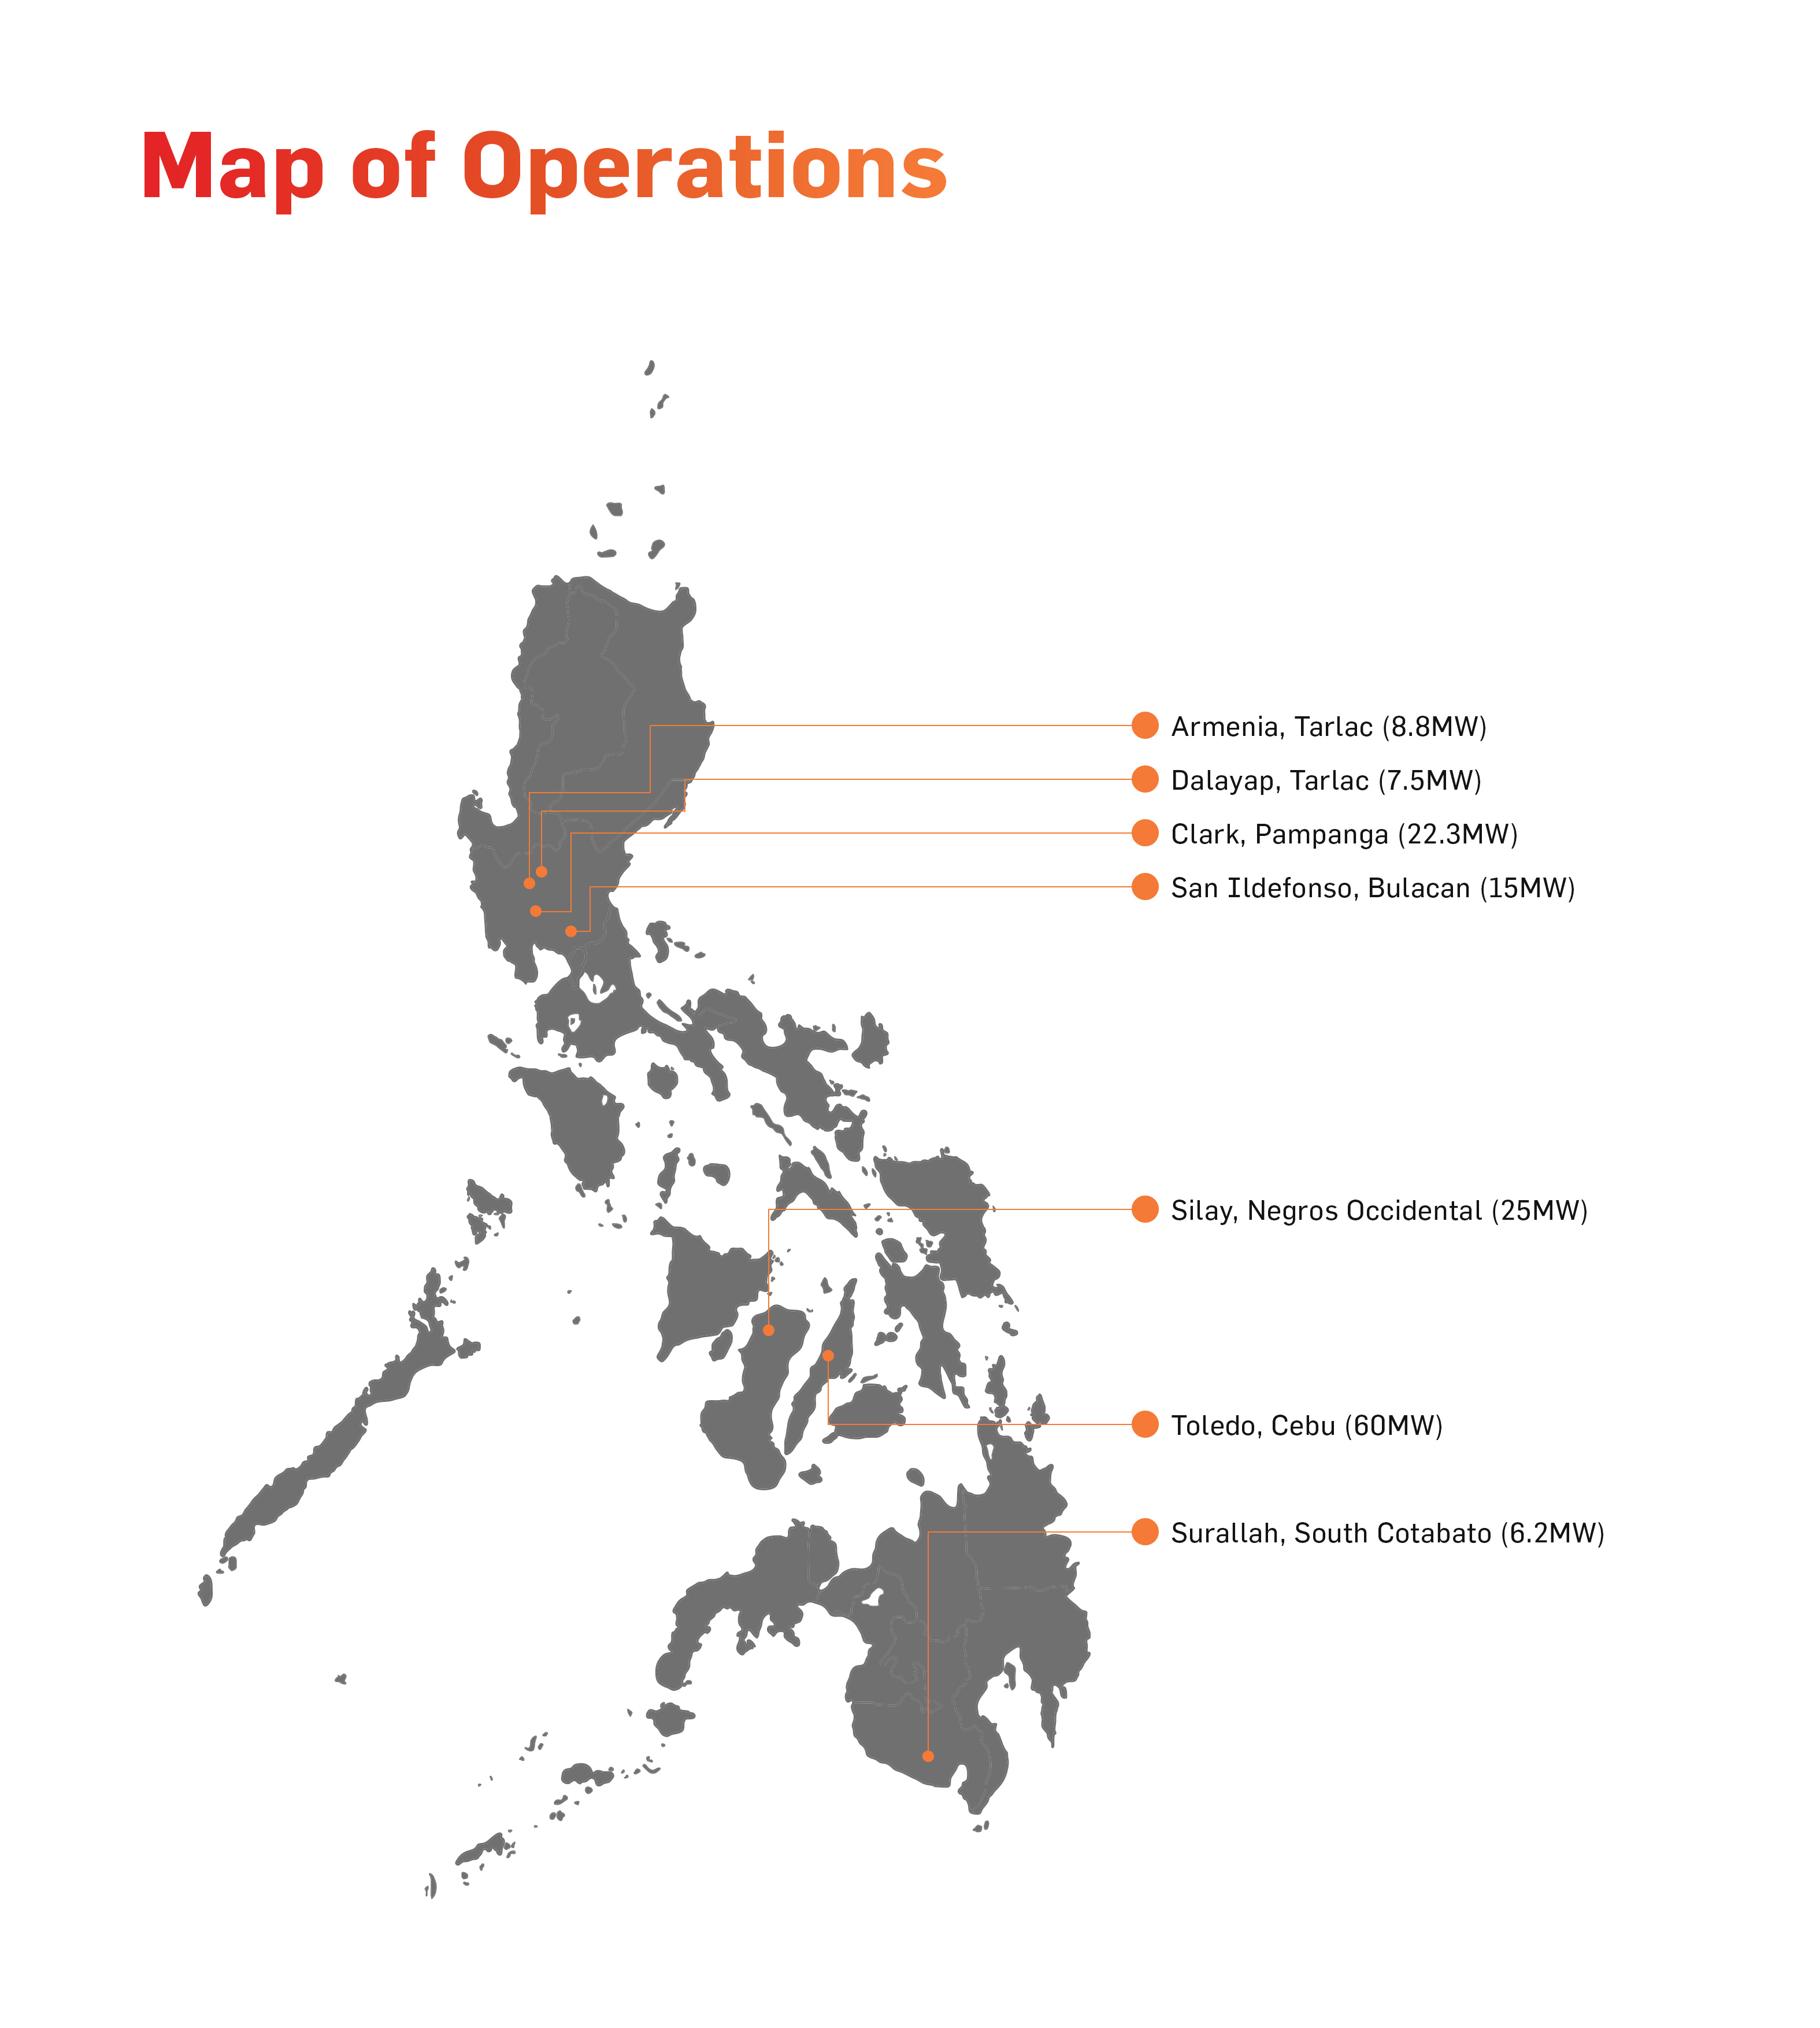 MAP OF OPERATIONS CREIT